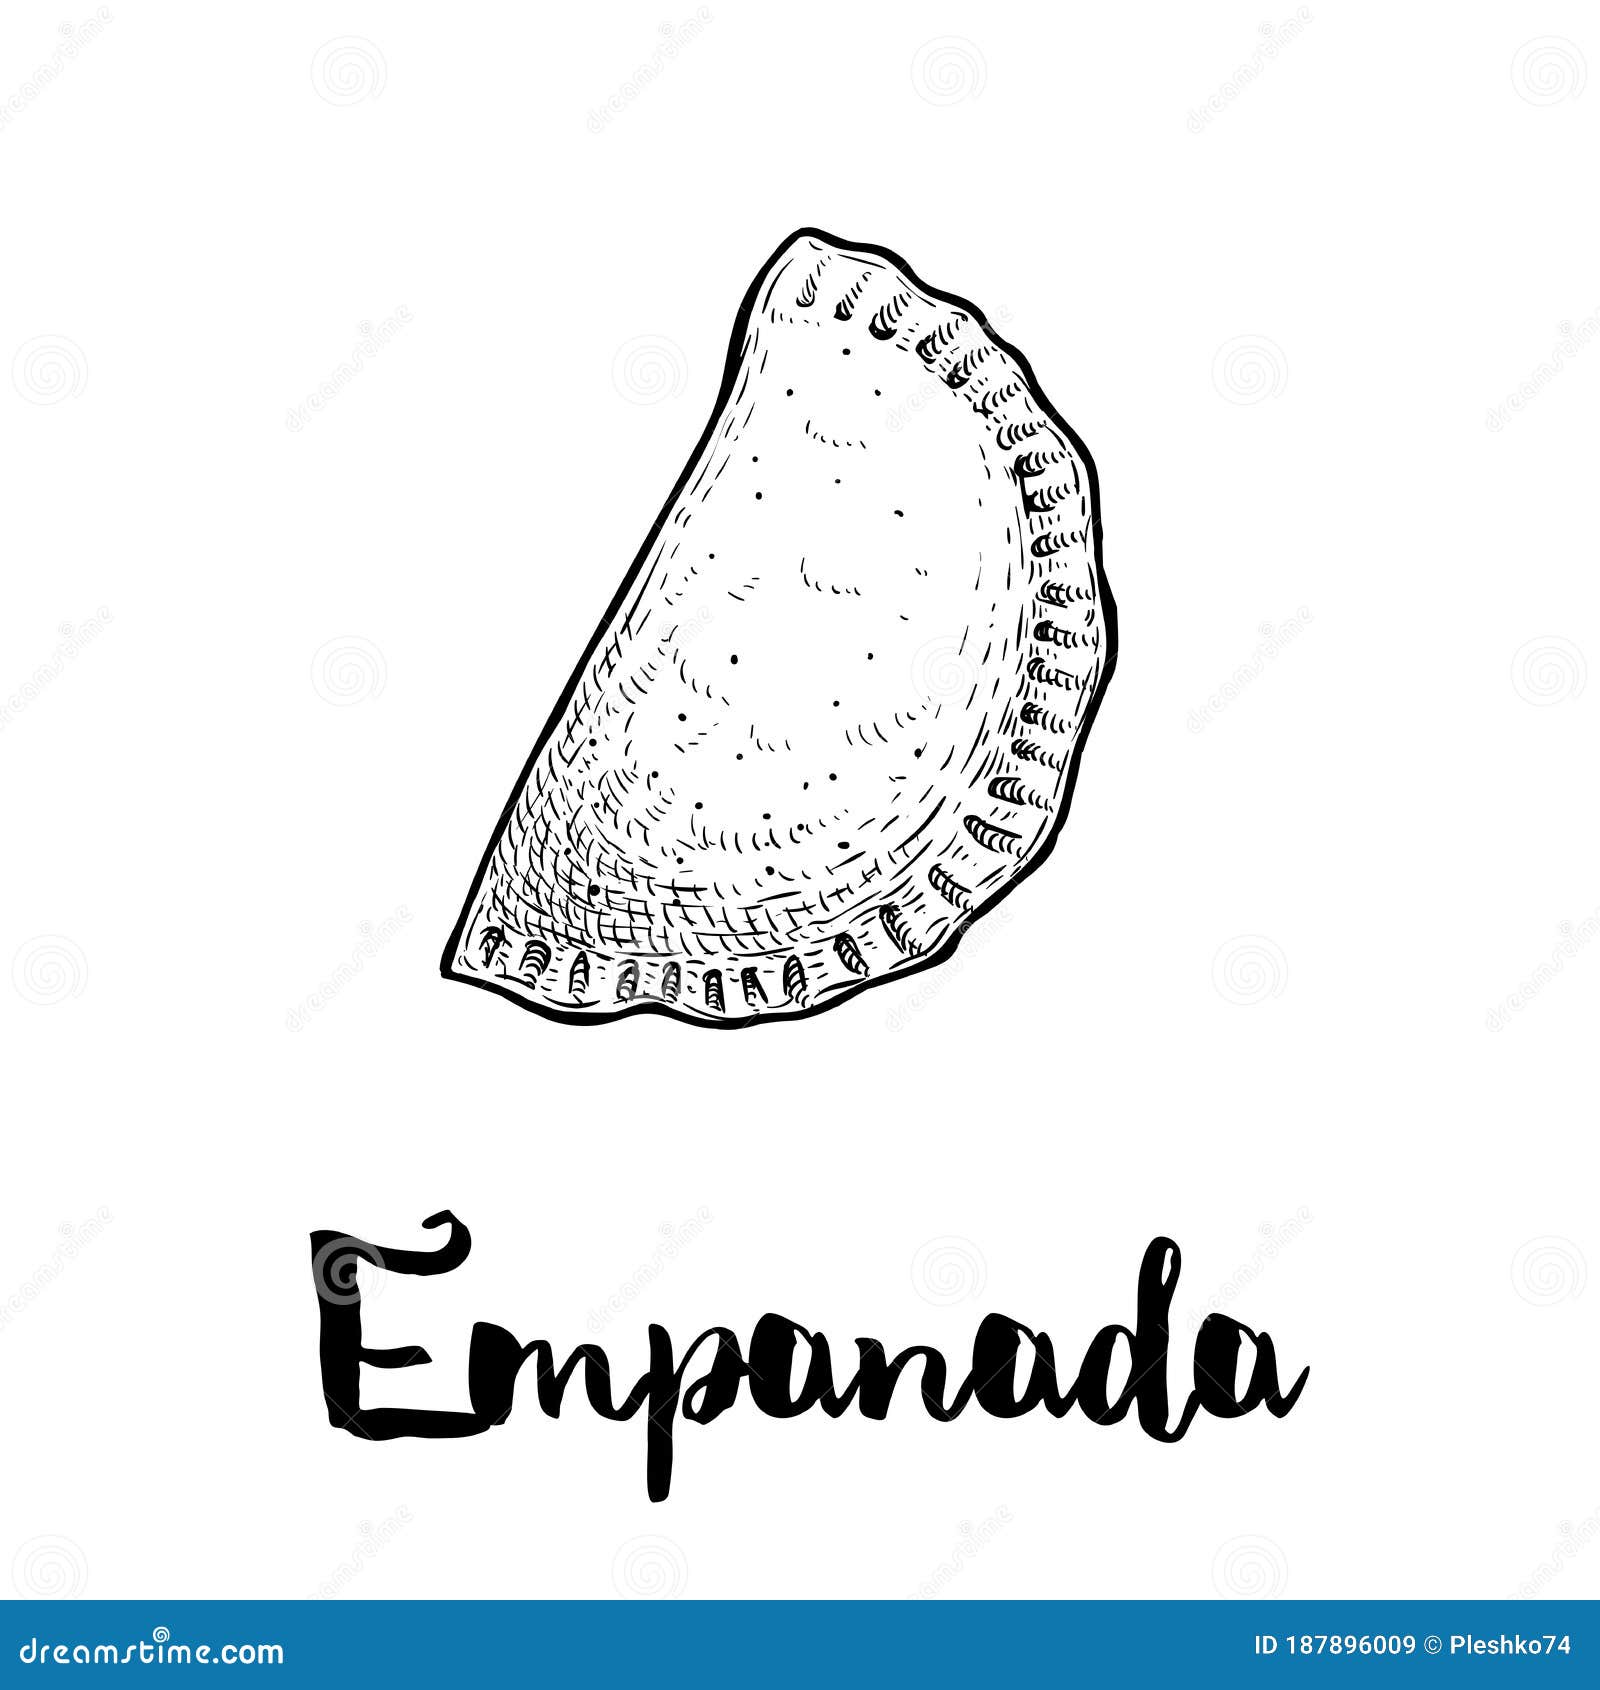 hand drawn sketch style empanada. typical latino america and spanish fast food.    on white background.